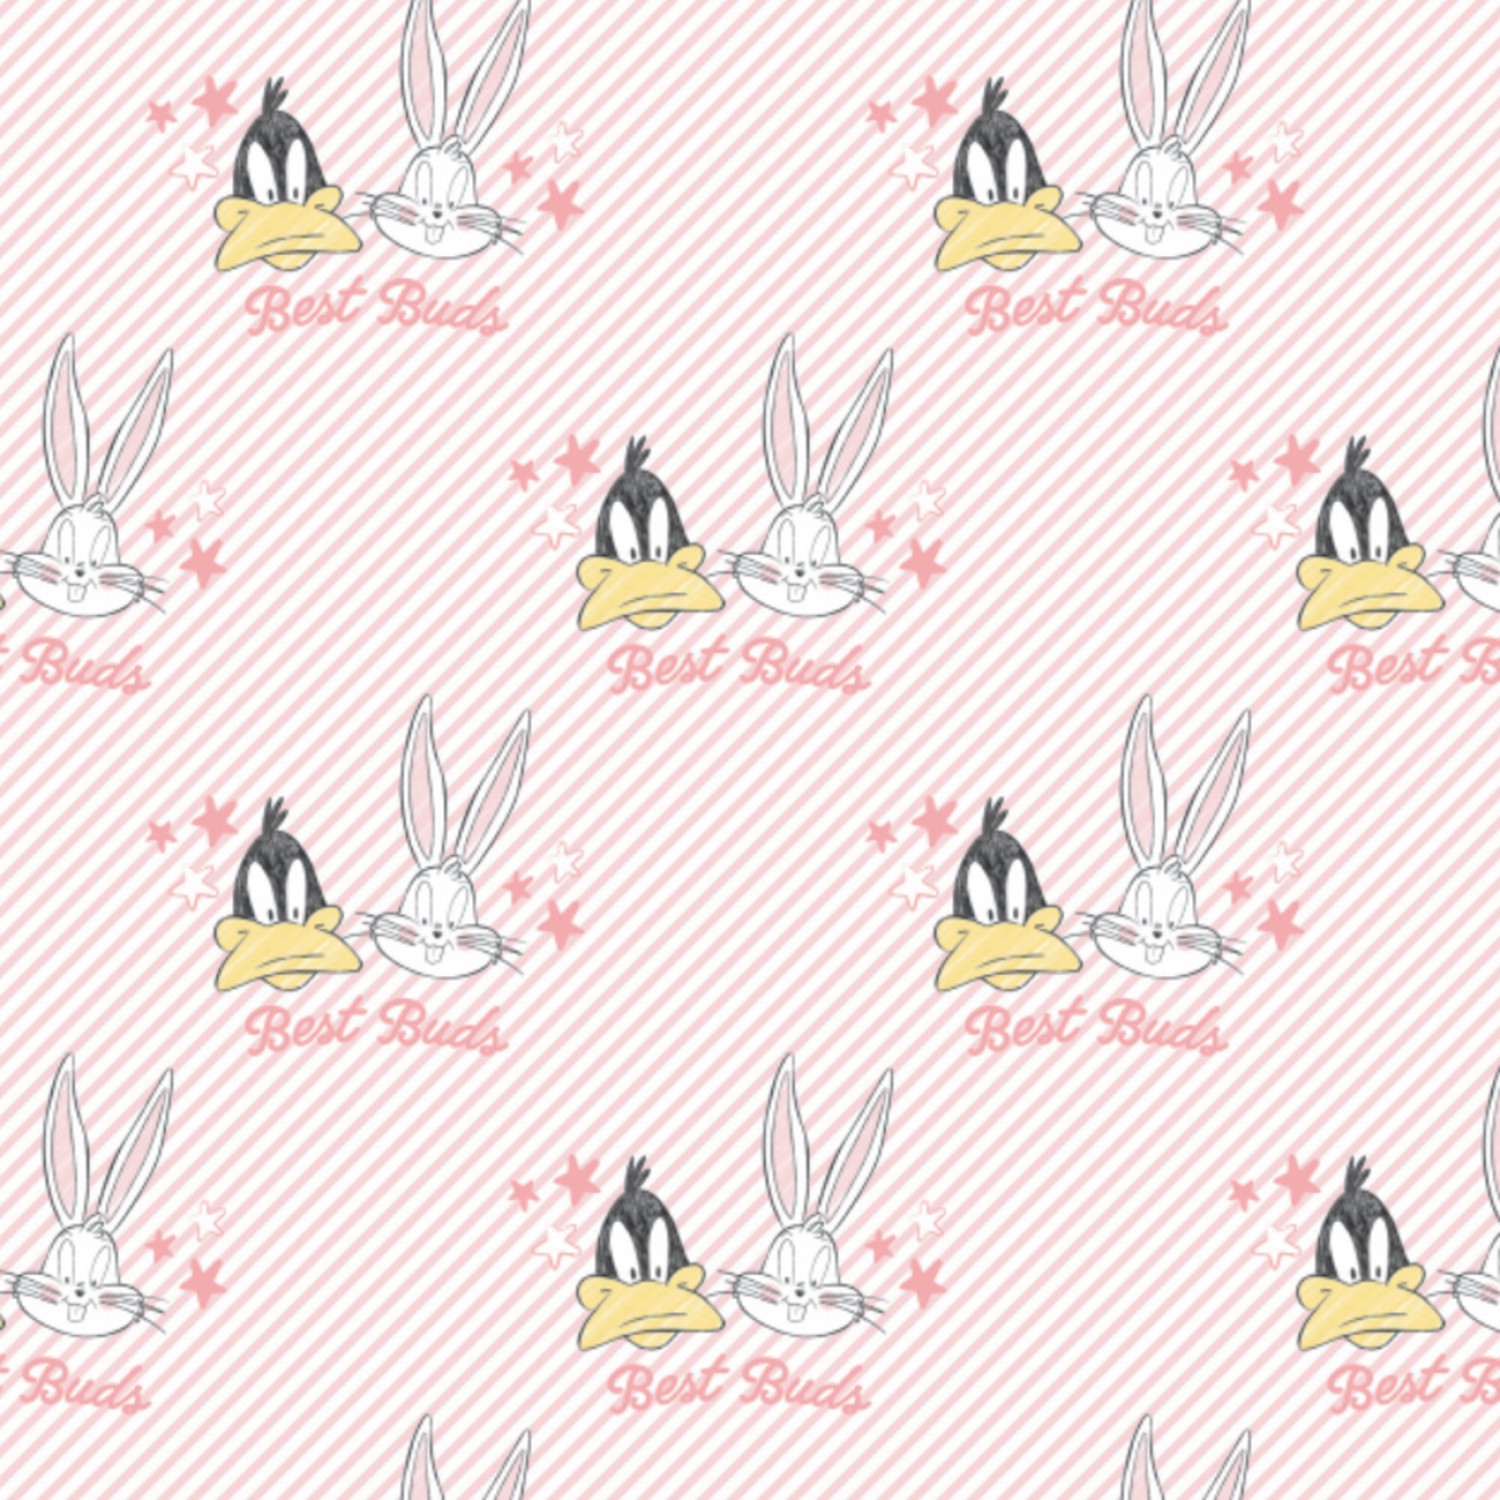 Looney Tunes Bugs and Daffy Best Buds Fabric - Pink